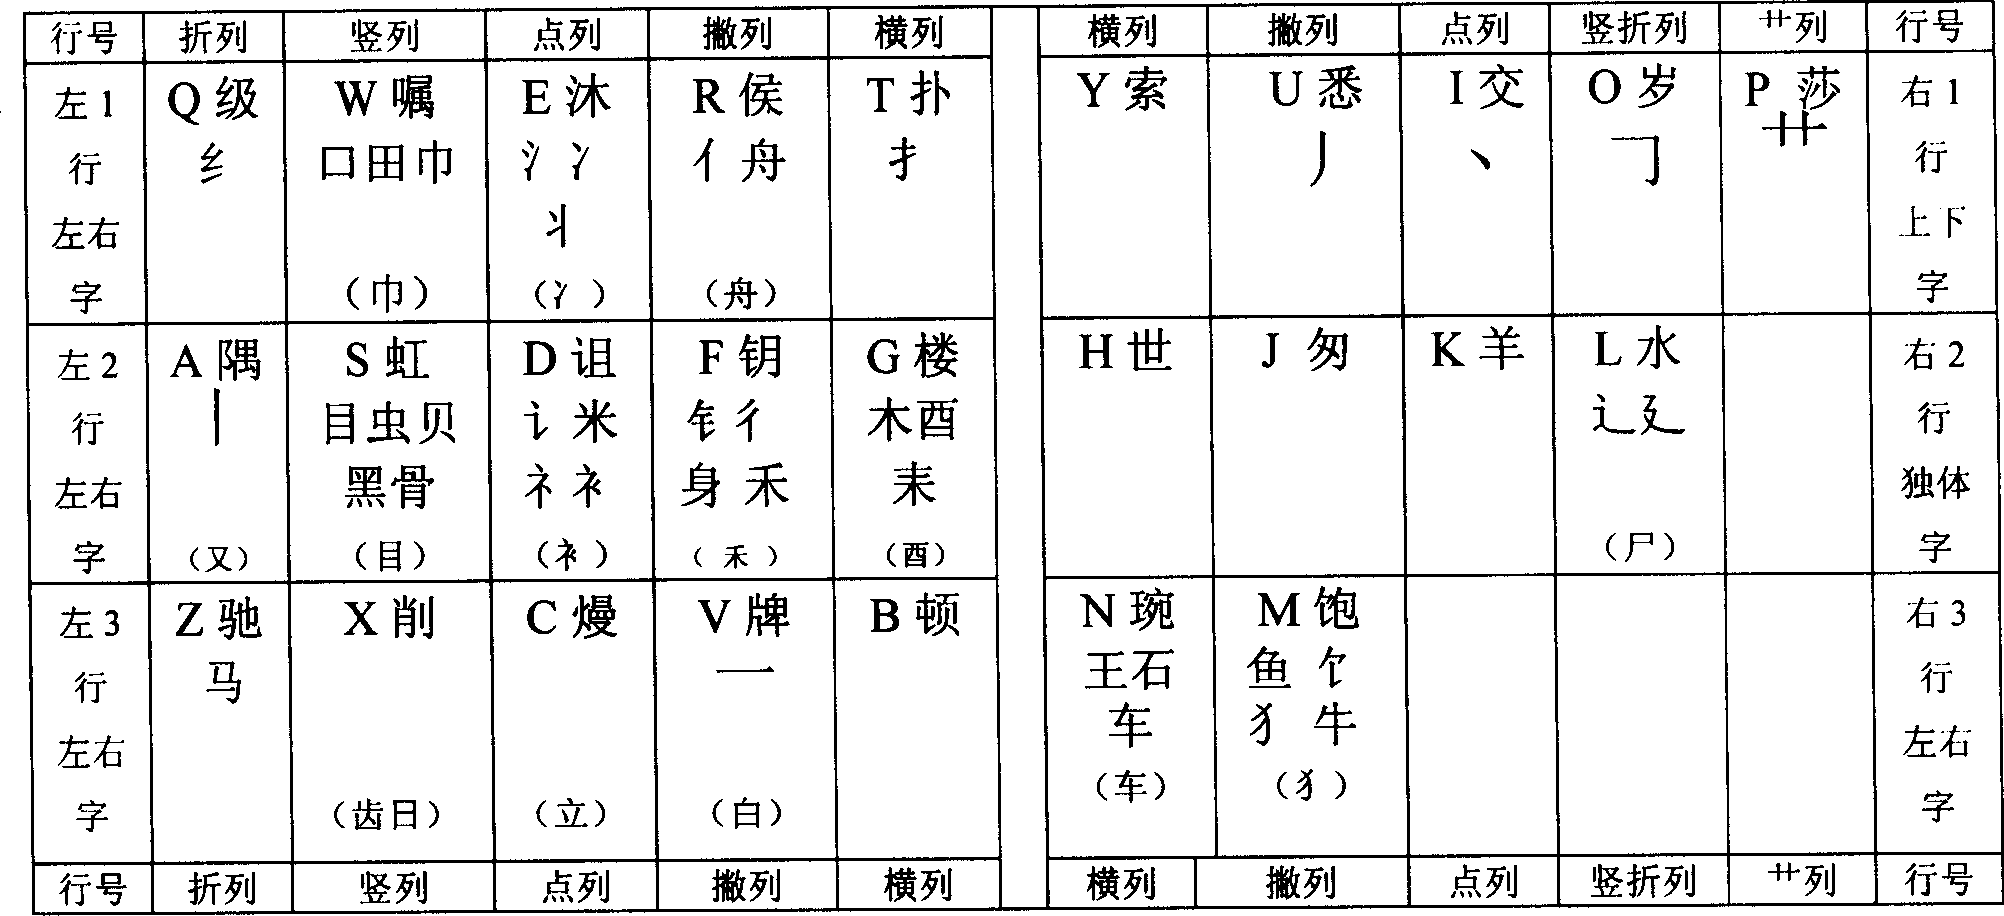 Position-shape-sound Chinese character coding and computer keyboard layout method